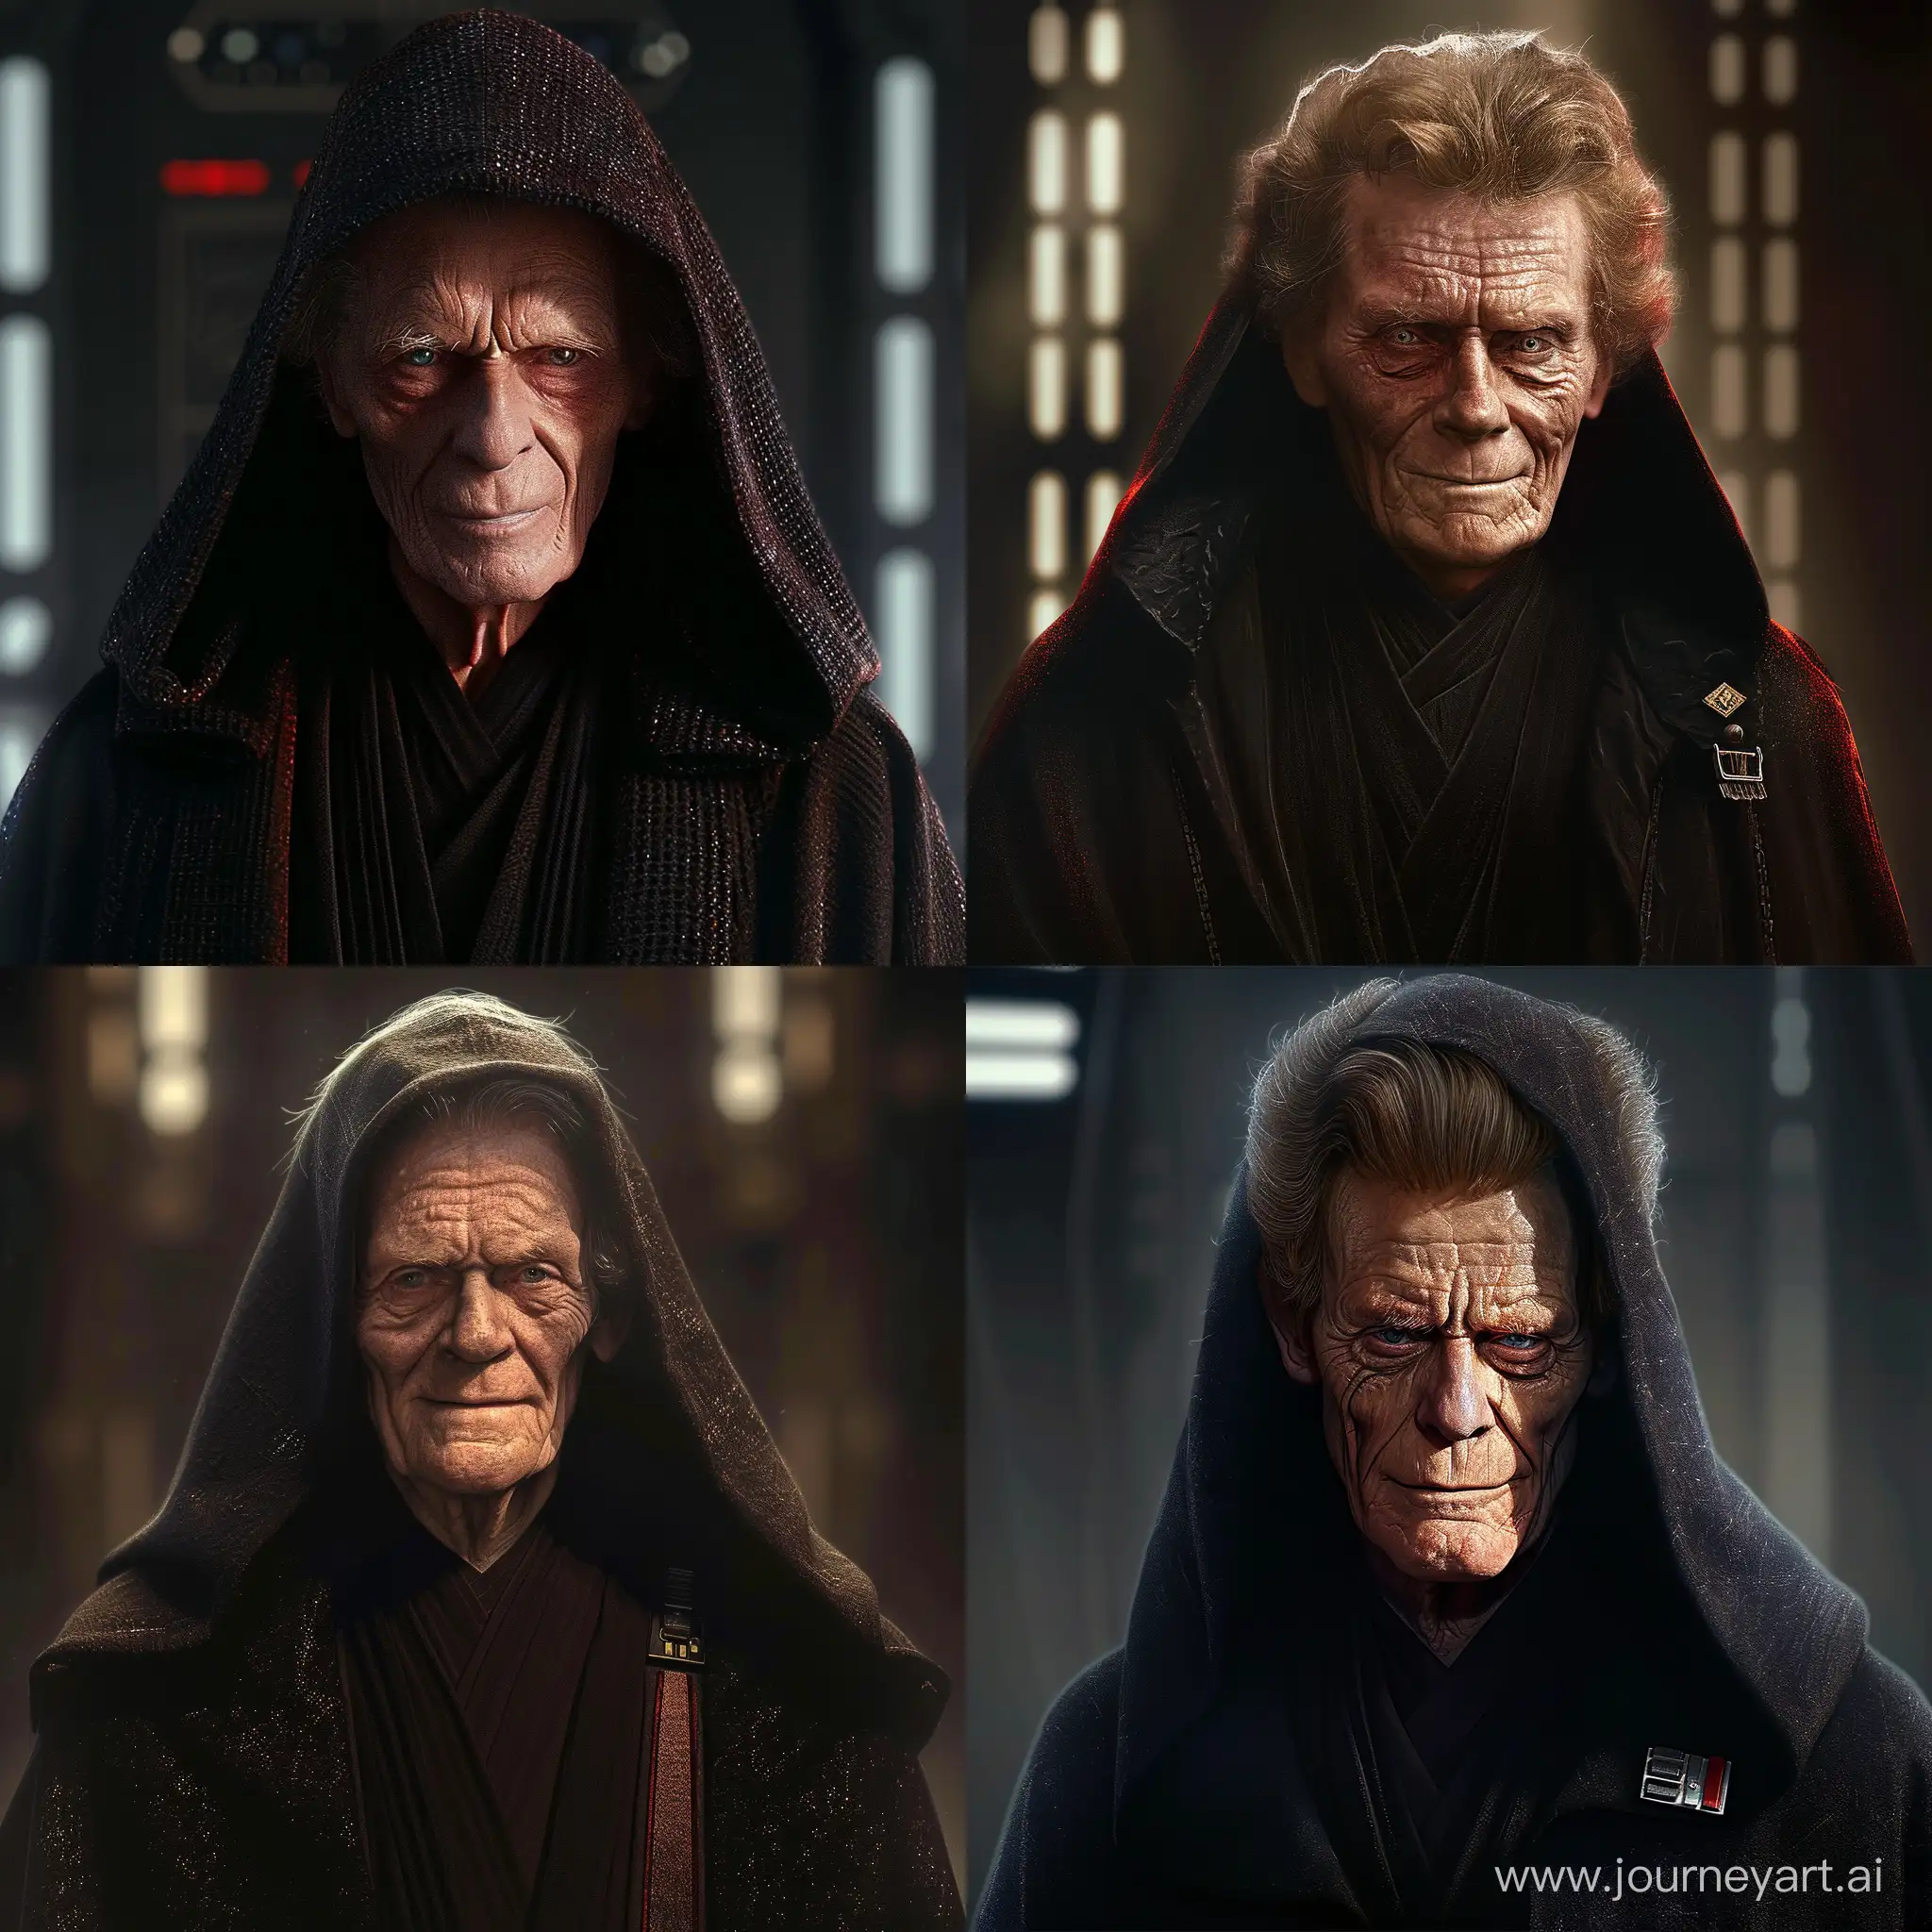 Generate an image featuring Willem Dafoe in the role of Chancellor Palpatine from Star Wars. Ensure that the depiction of Chancellor Palpatine clearly resembles Willem Dafoe, incorporating his distinctive facial features. Emphasize the cunning and manipulative nature of Palpatine, with Dafoe capturing the character's sly demeanor. Pay attention to the details of Palpatine's political attire and ensure that Willem Dafoe brings his unique presence to the role, creating an image that combines the actor's recognizable appearance with the dark essence of the Sith Lord.